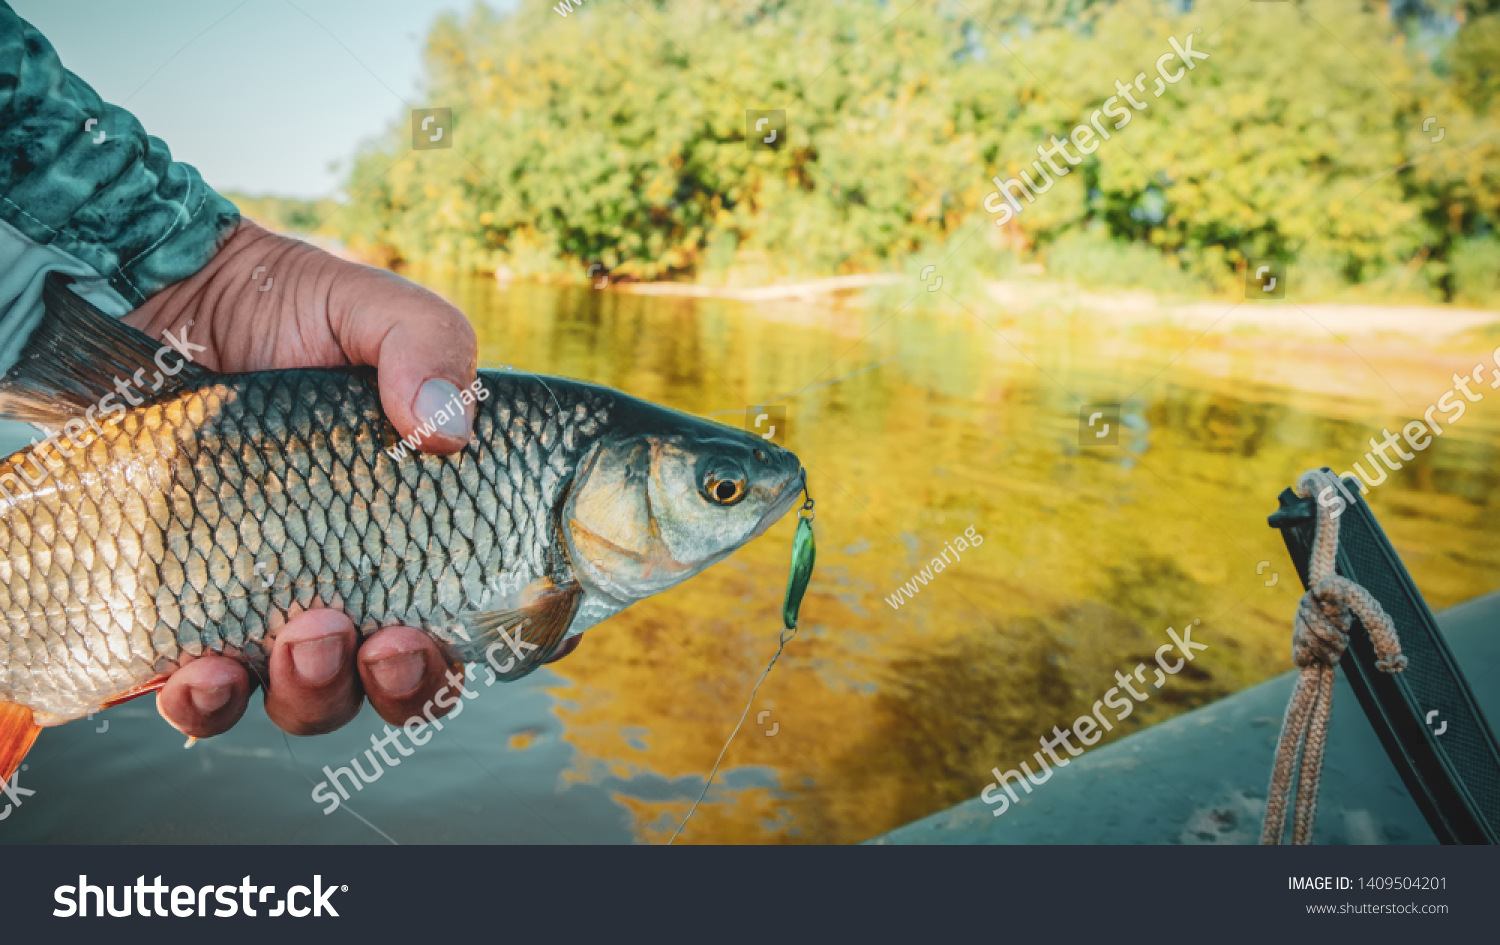 Fish in the hand of an angler. Chub. #1409504201